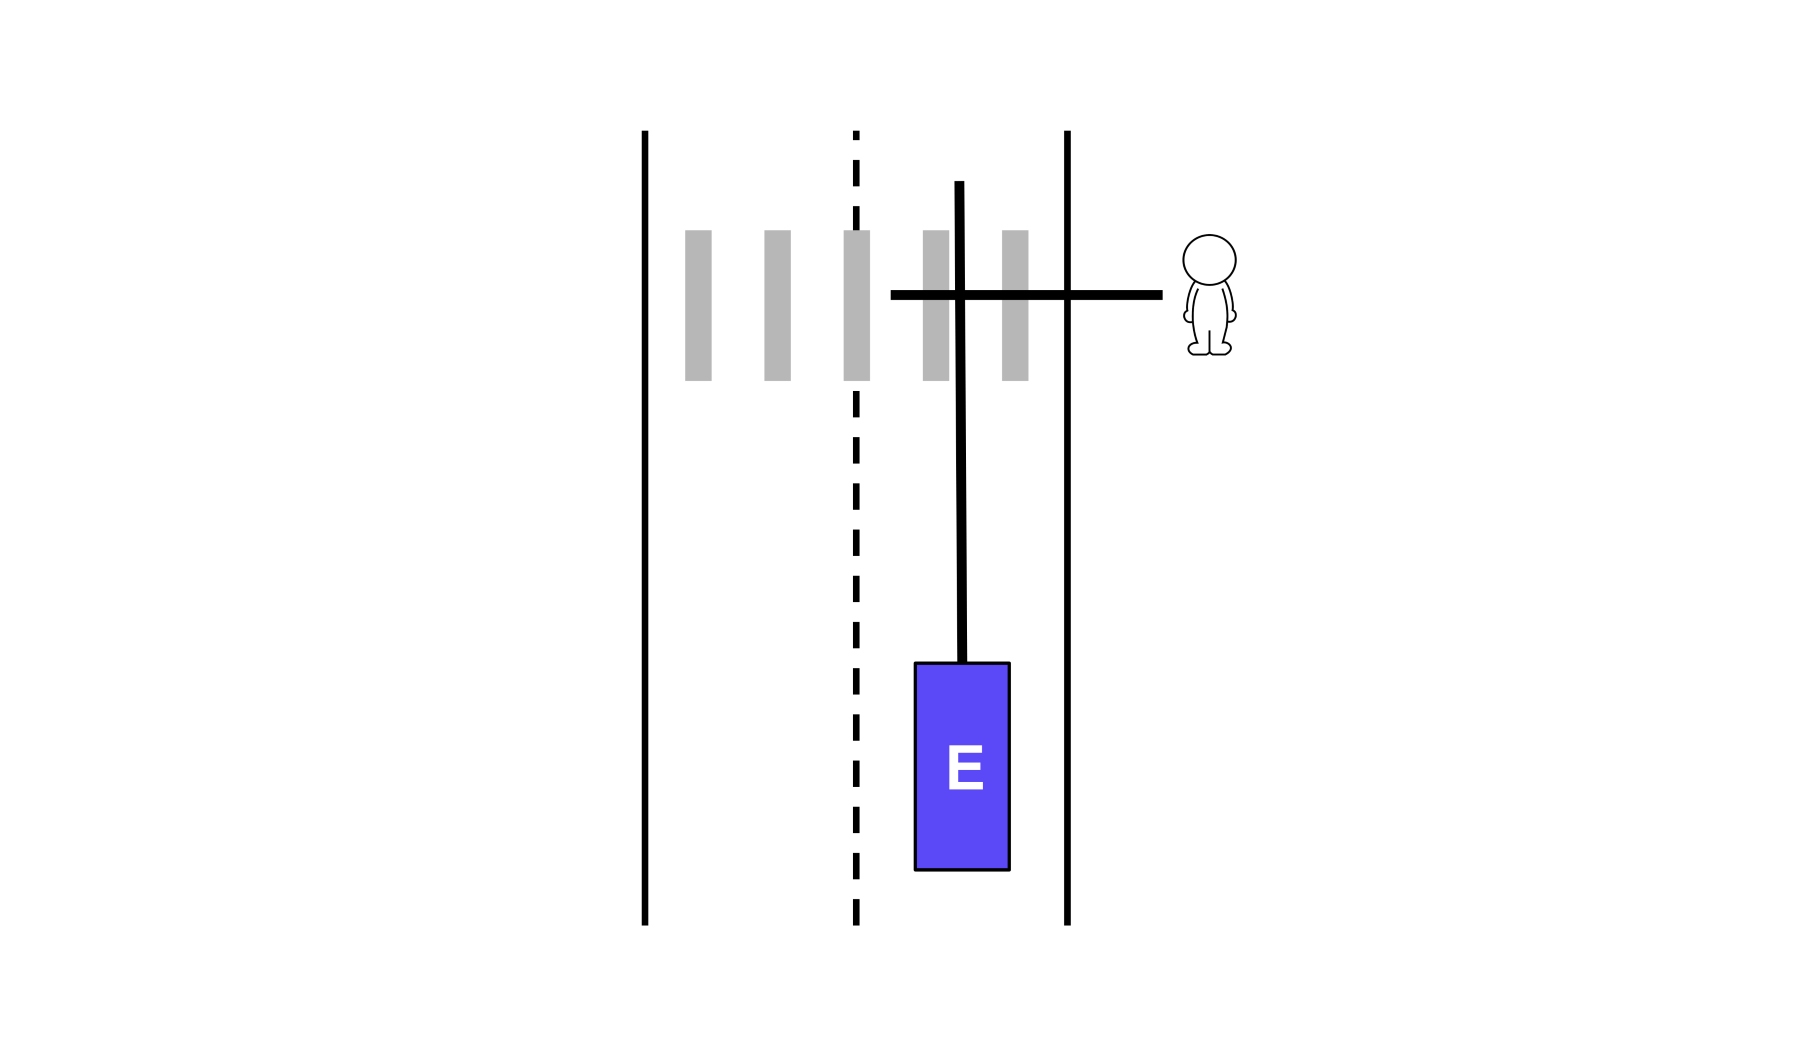 A graphic showing a bird's eye view of how Motional’s AVs use PredictNet to determine if a pedestrian plans to cross a road, and then if it needs to yield to that pedestrian.